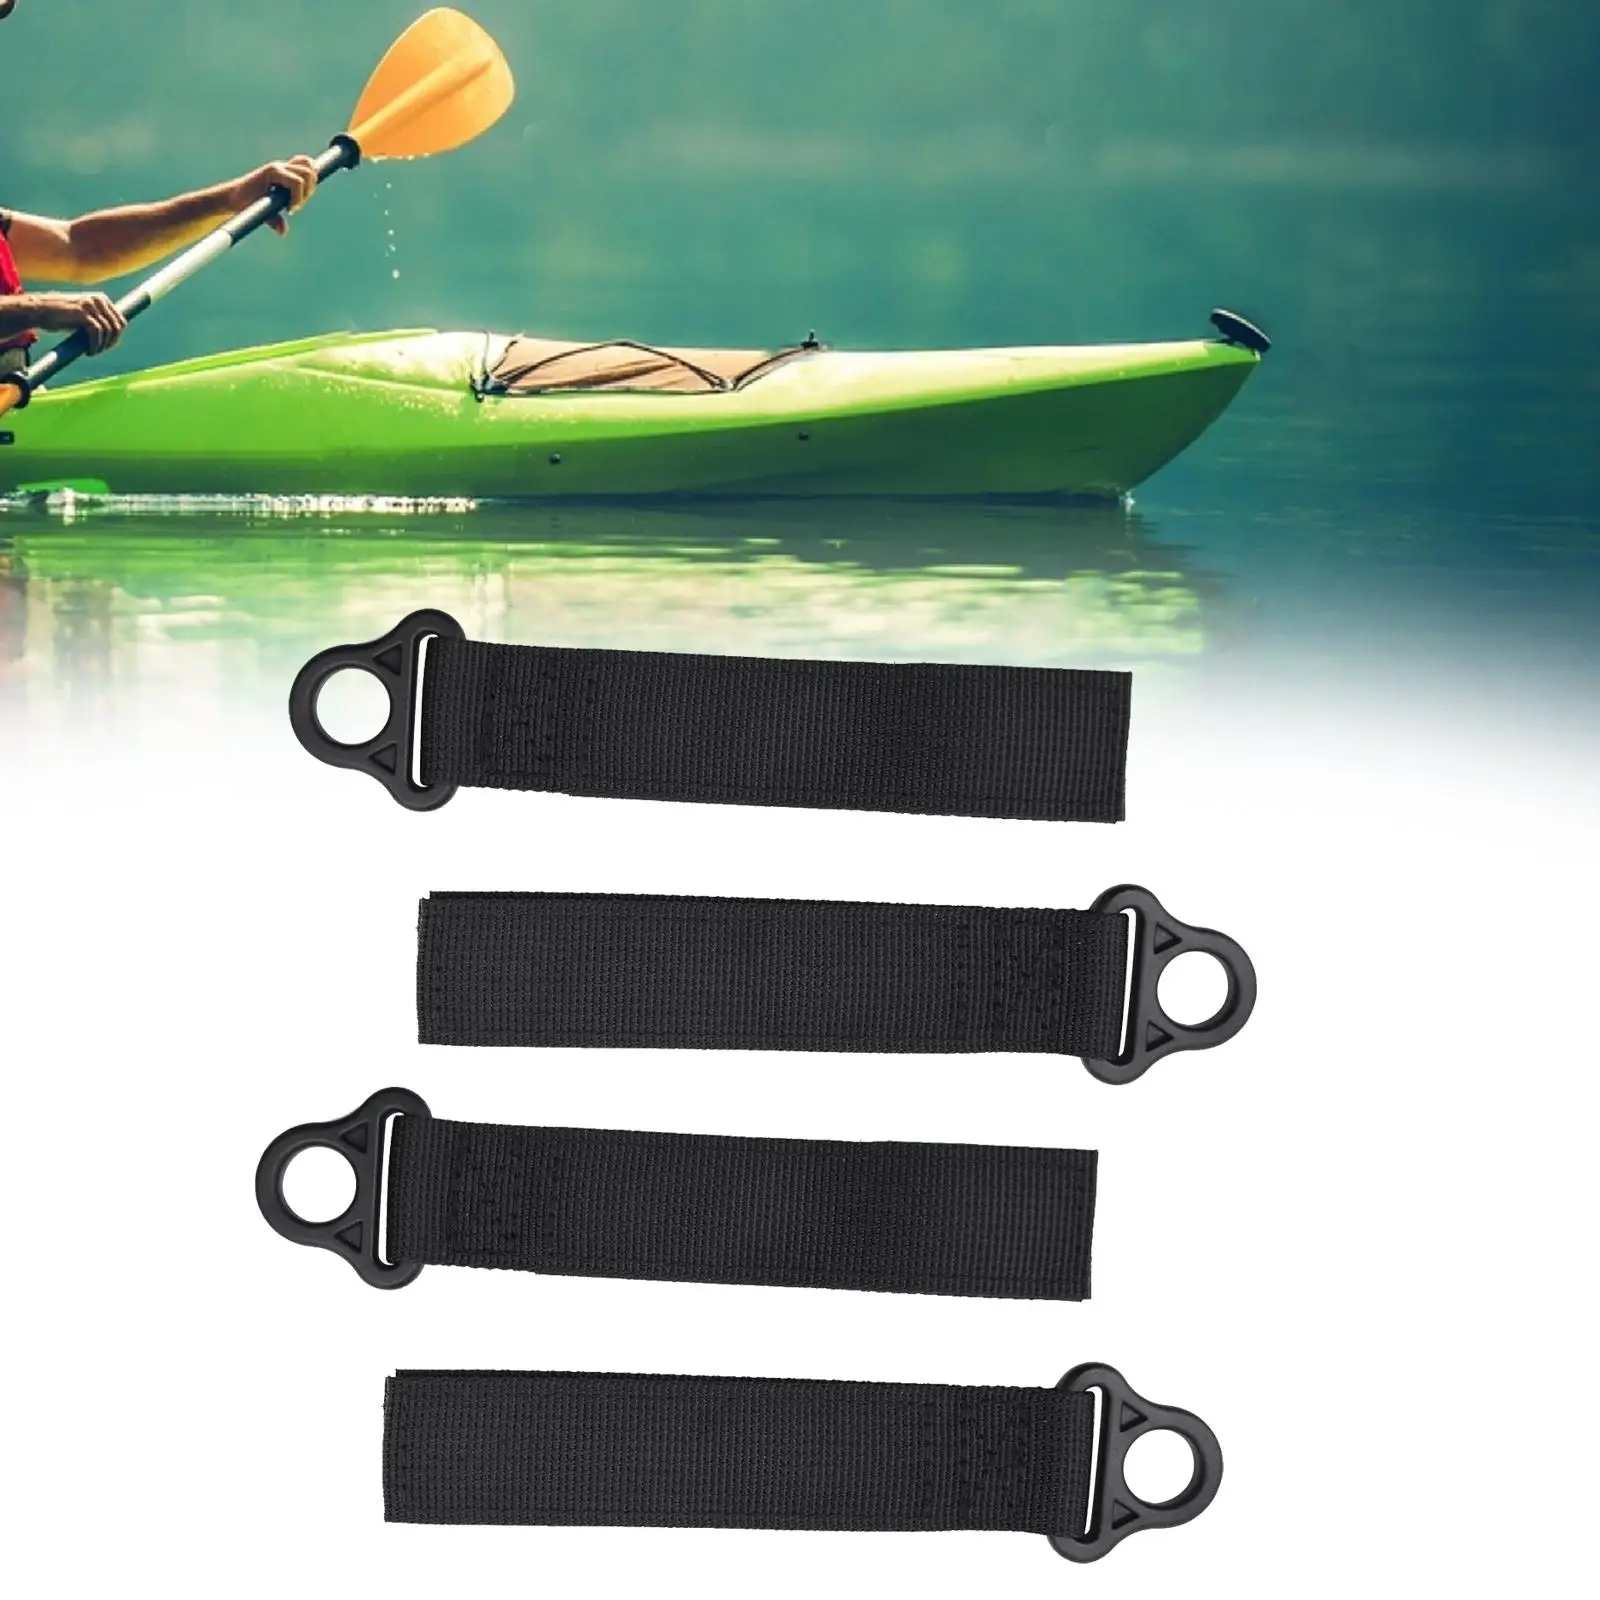 4 Pieces Paddle Board Accessories Dinghy Surfboard Watercraft Lightweight Durable Paddleboard Fishing Pole Kayak Paddle Keeper